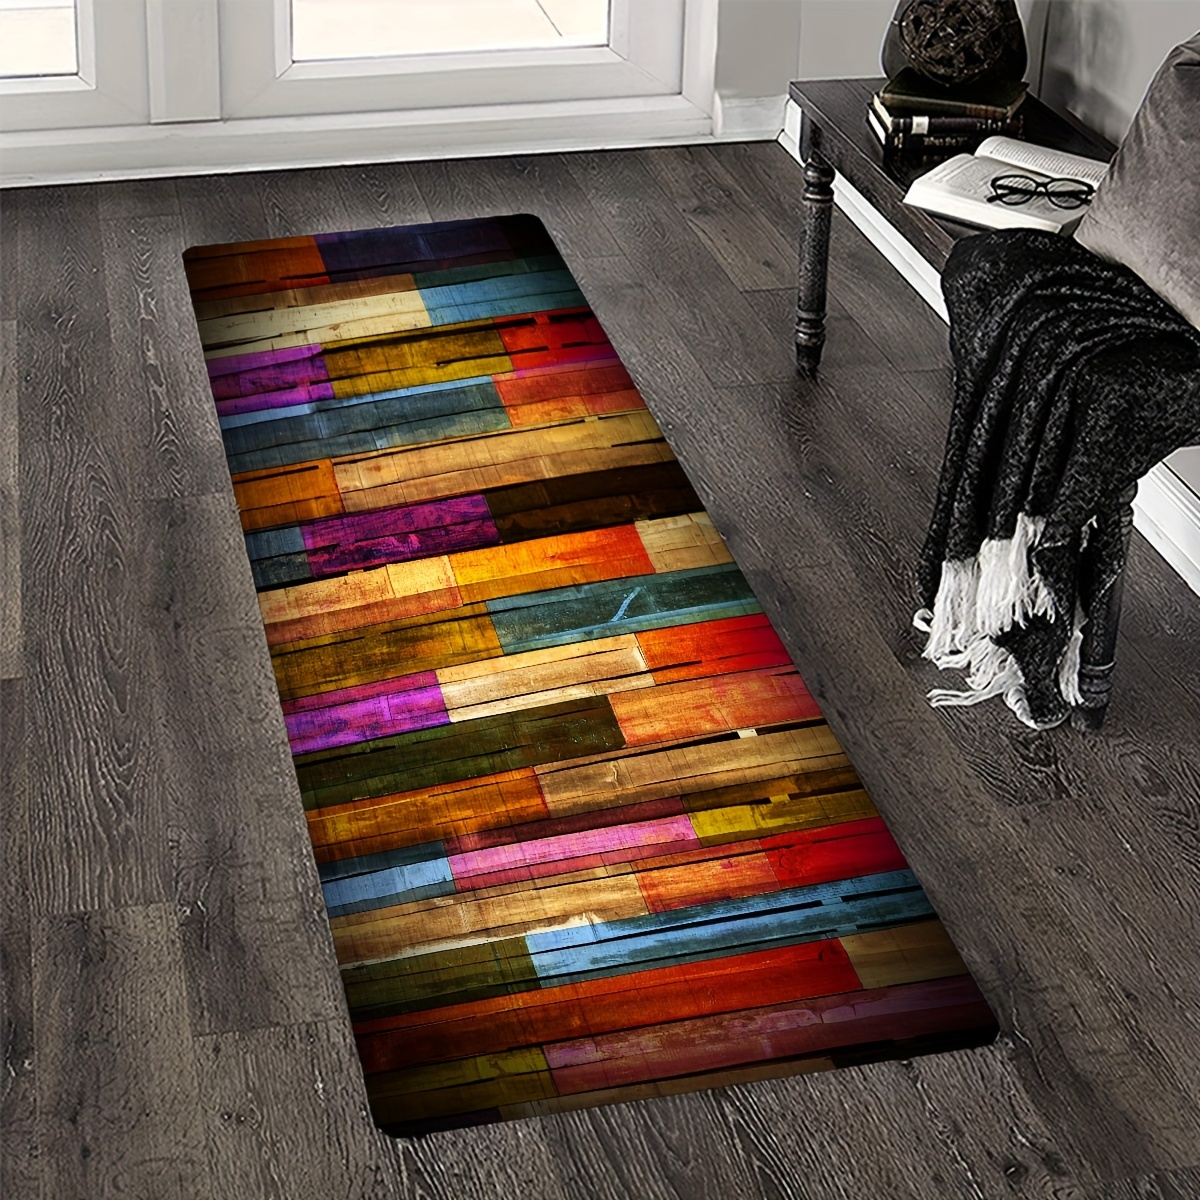 Imitation Wood Panel Kitchen Rugs, Vintage Absorbent Non Slip Cushioned Rugs,  Stain Resistant Waterproof Long Strip Floor Mat, Comfort Standing Mats,  Living Room Bedroom Bathroom Kitchen Sink Laundry Office Area Rugs Runner